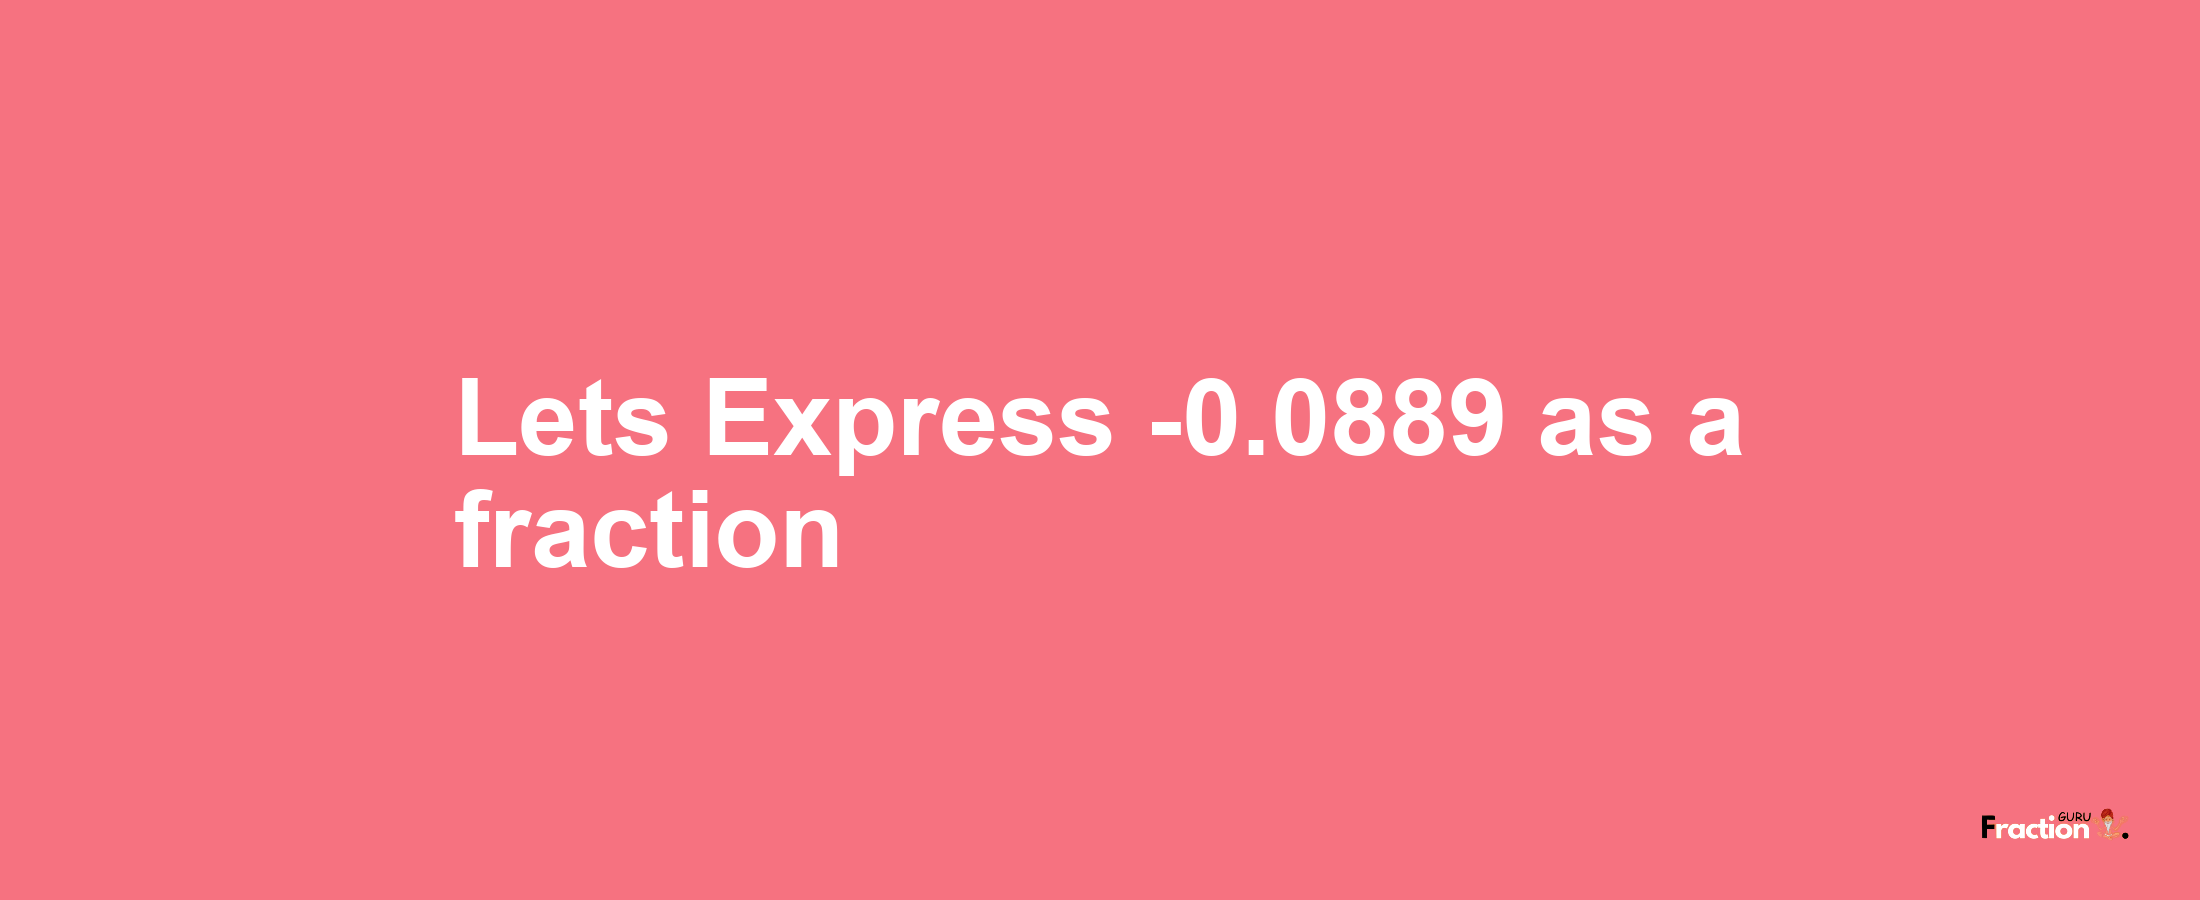 Lets Express -0.0889 as afraction